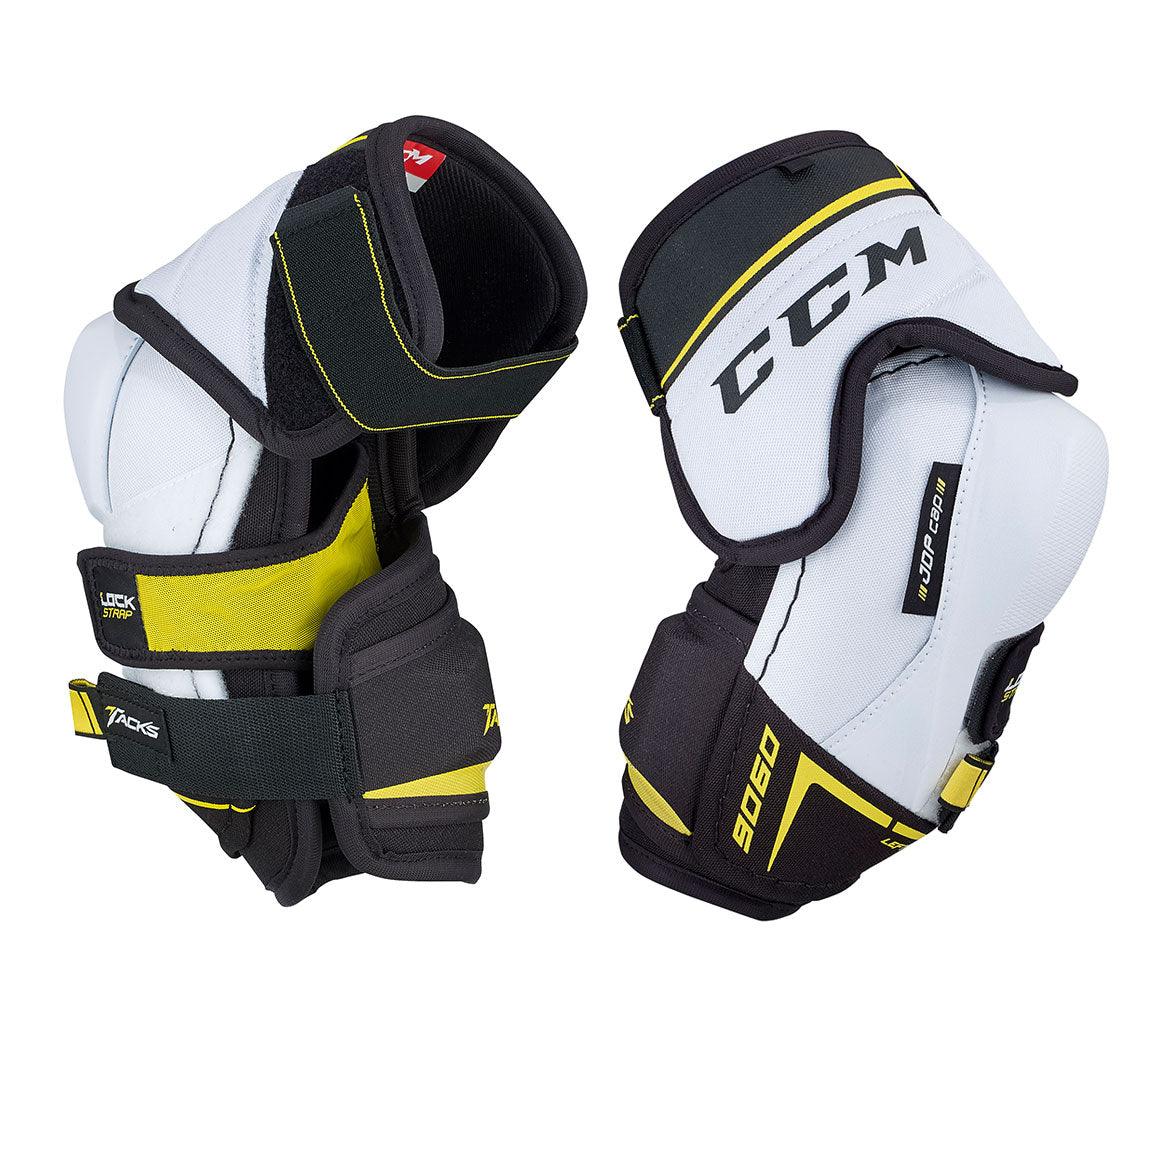 Tacks 9060 Elbow Pads - Junior - Sports Excellence